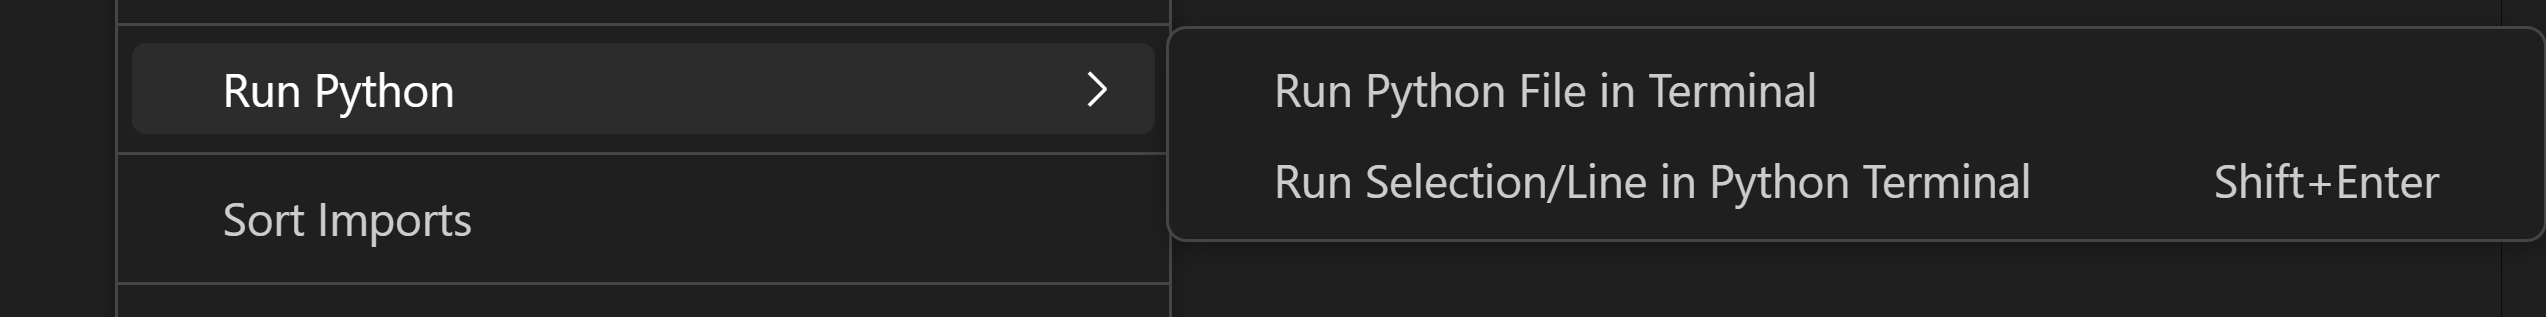 Run Python option on context menu with "Run file in terminal" and "Run selection/line" options in the submenu